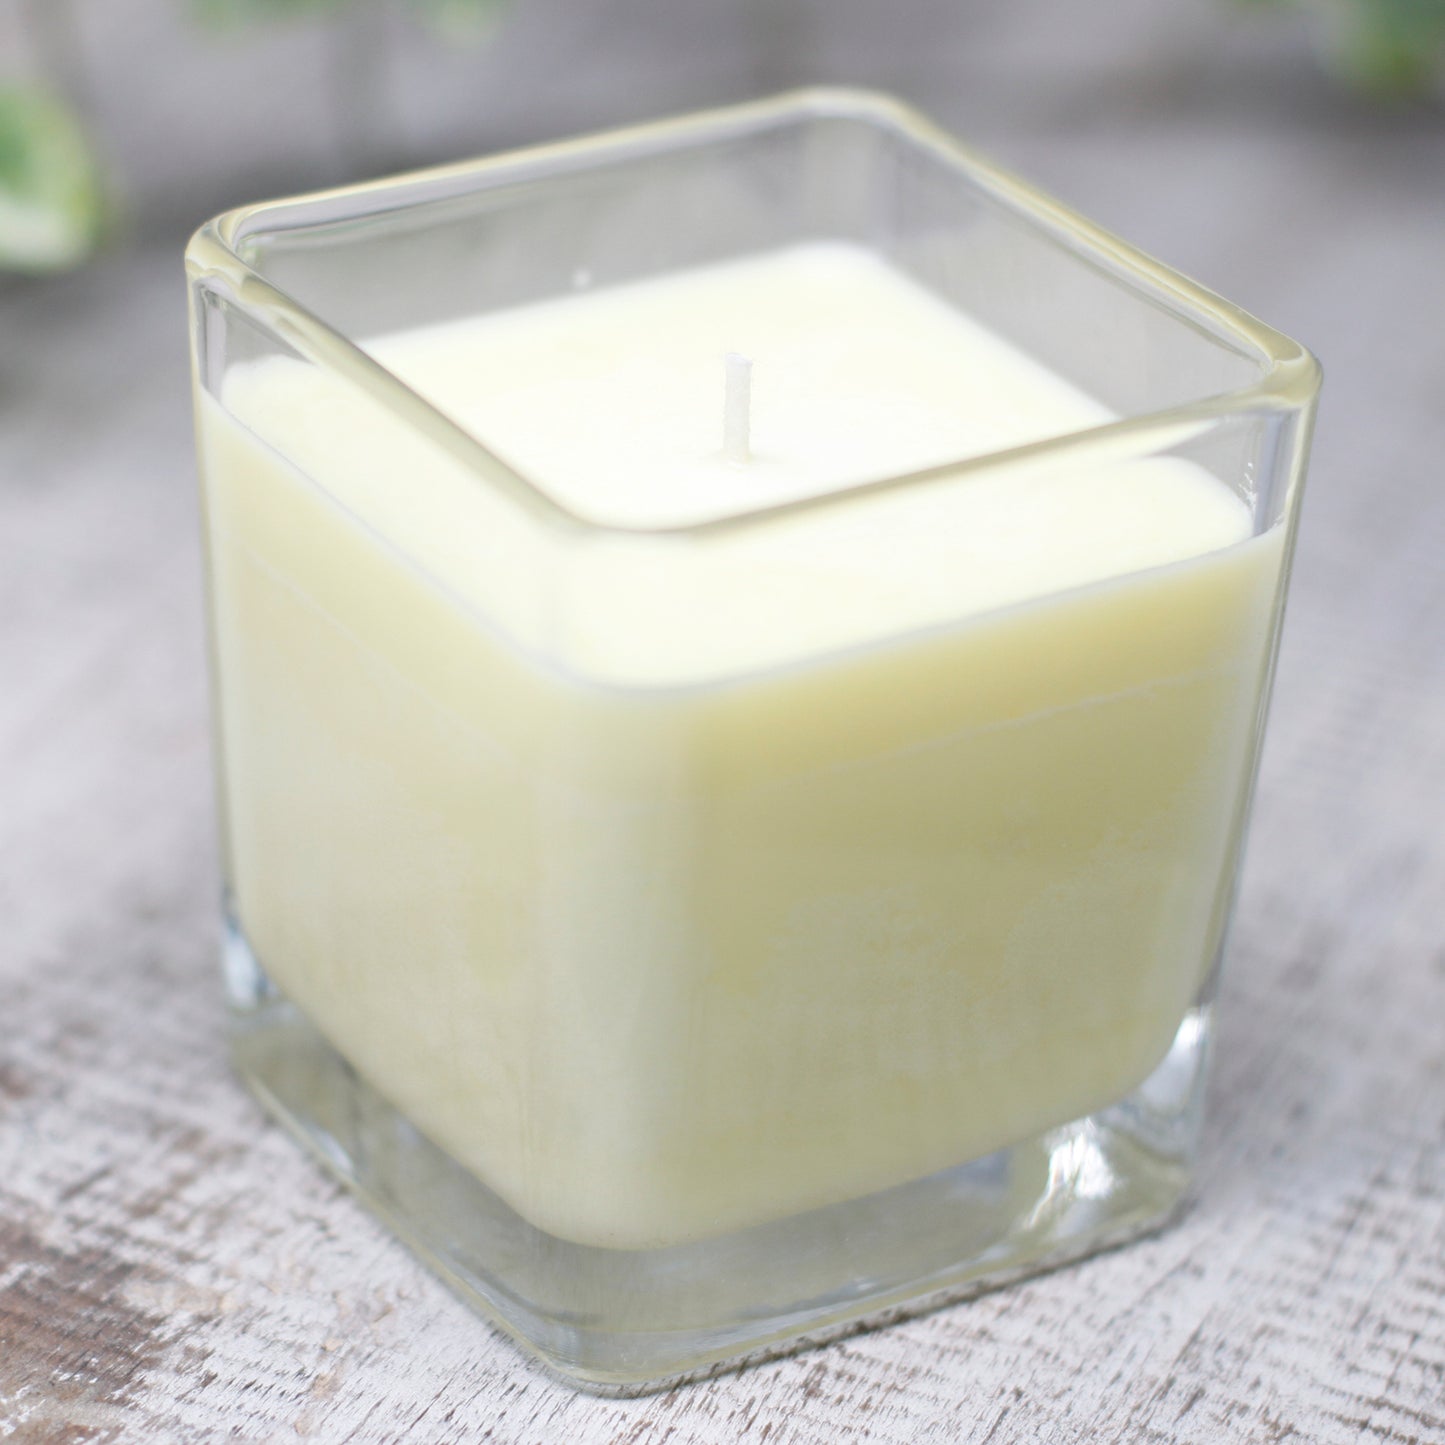 White Label Soy Wax Jar Candle - Home Bakery